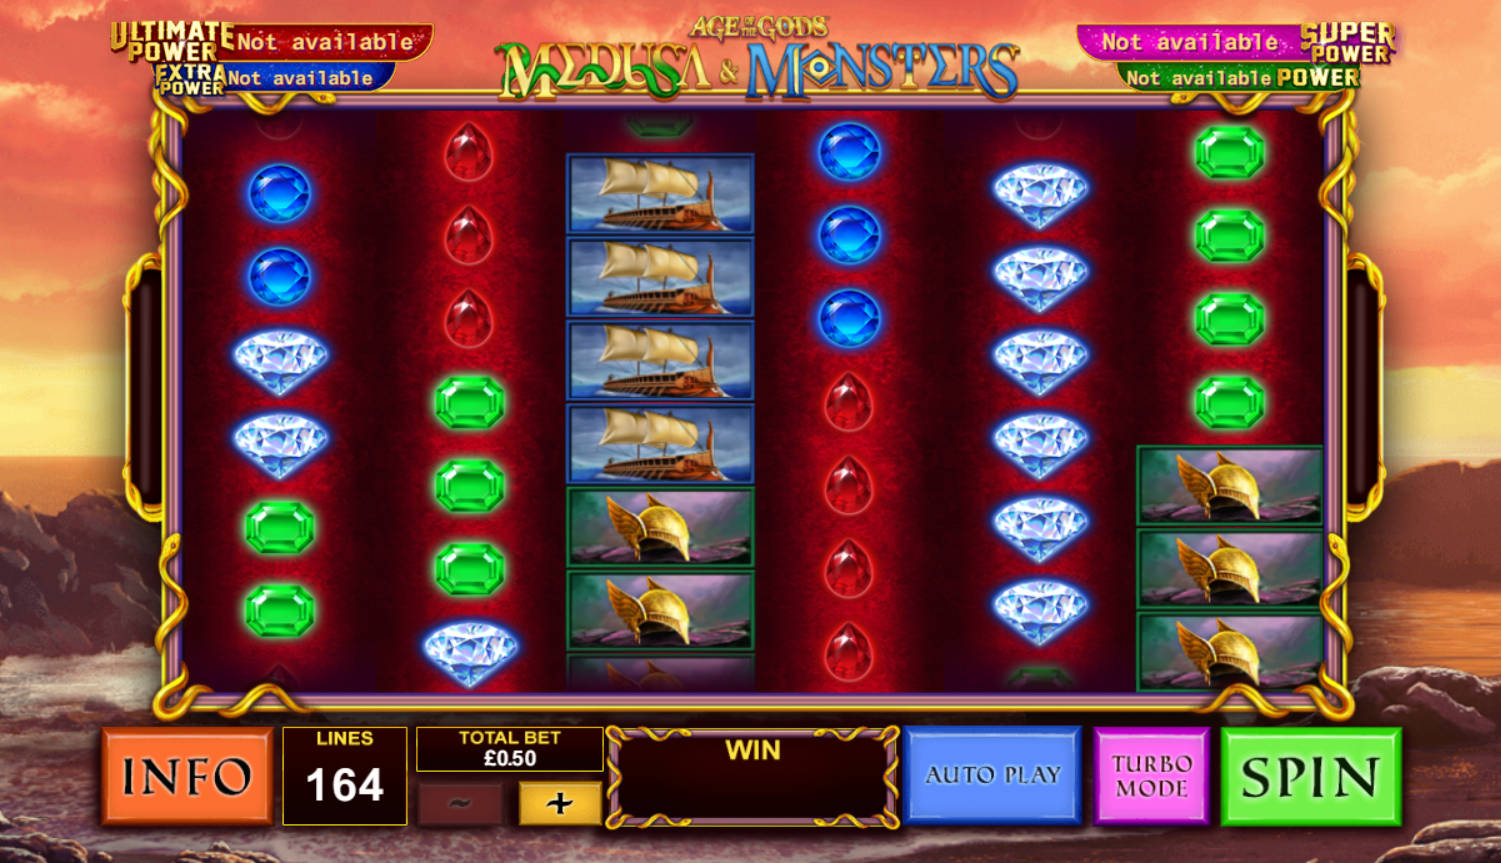 Attack of the monsters slot machine games